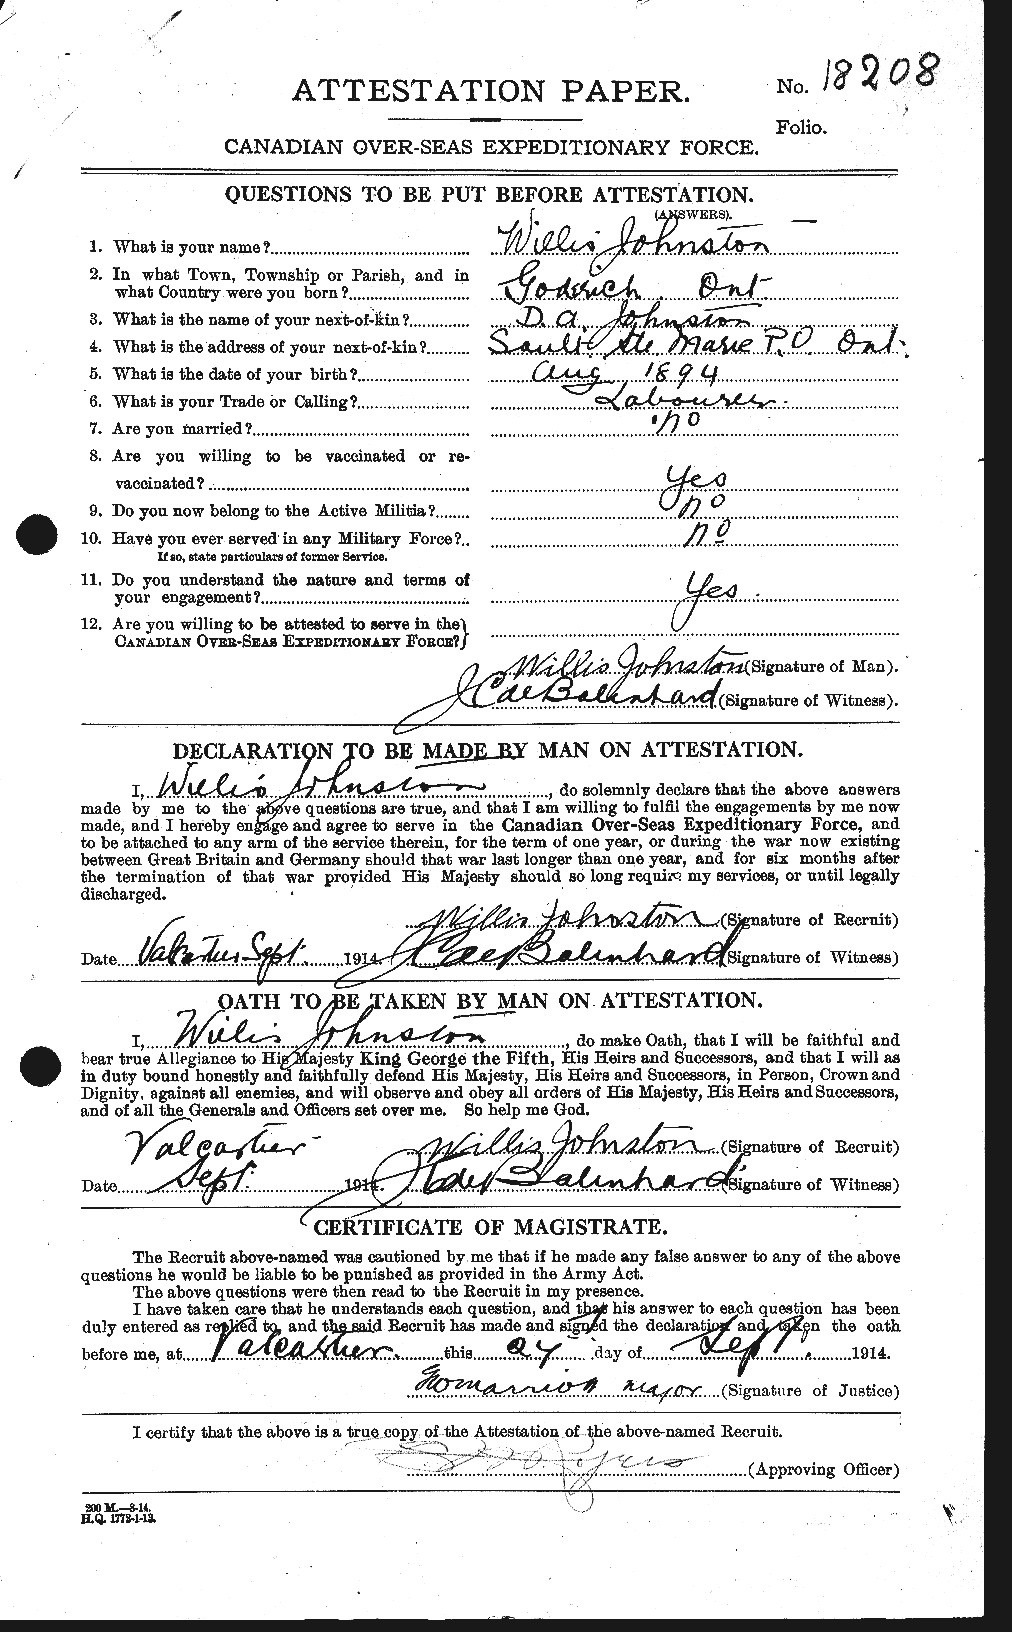 Personnel Records of the First World War - CEF 429631a